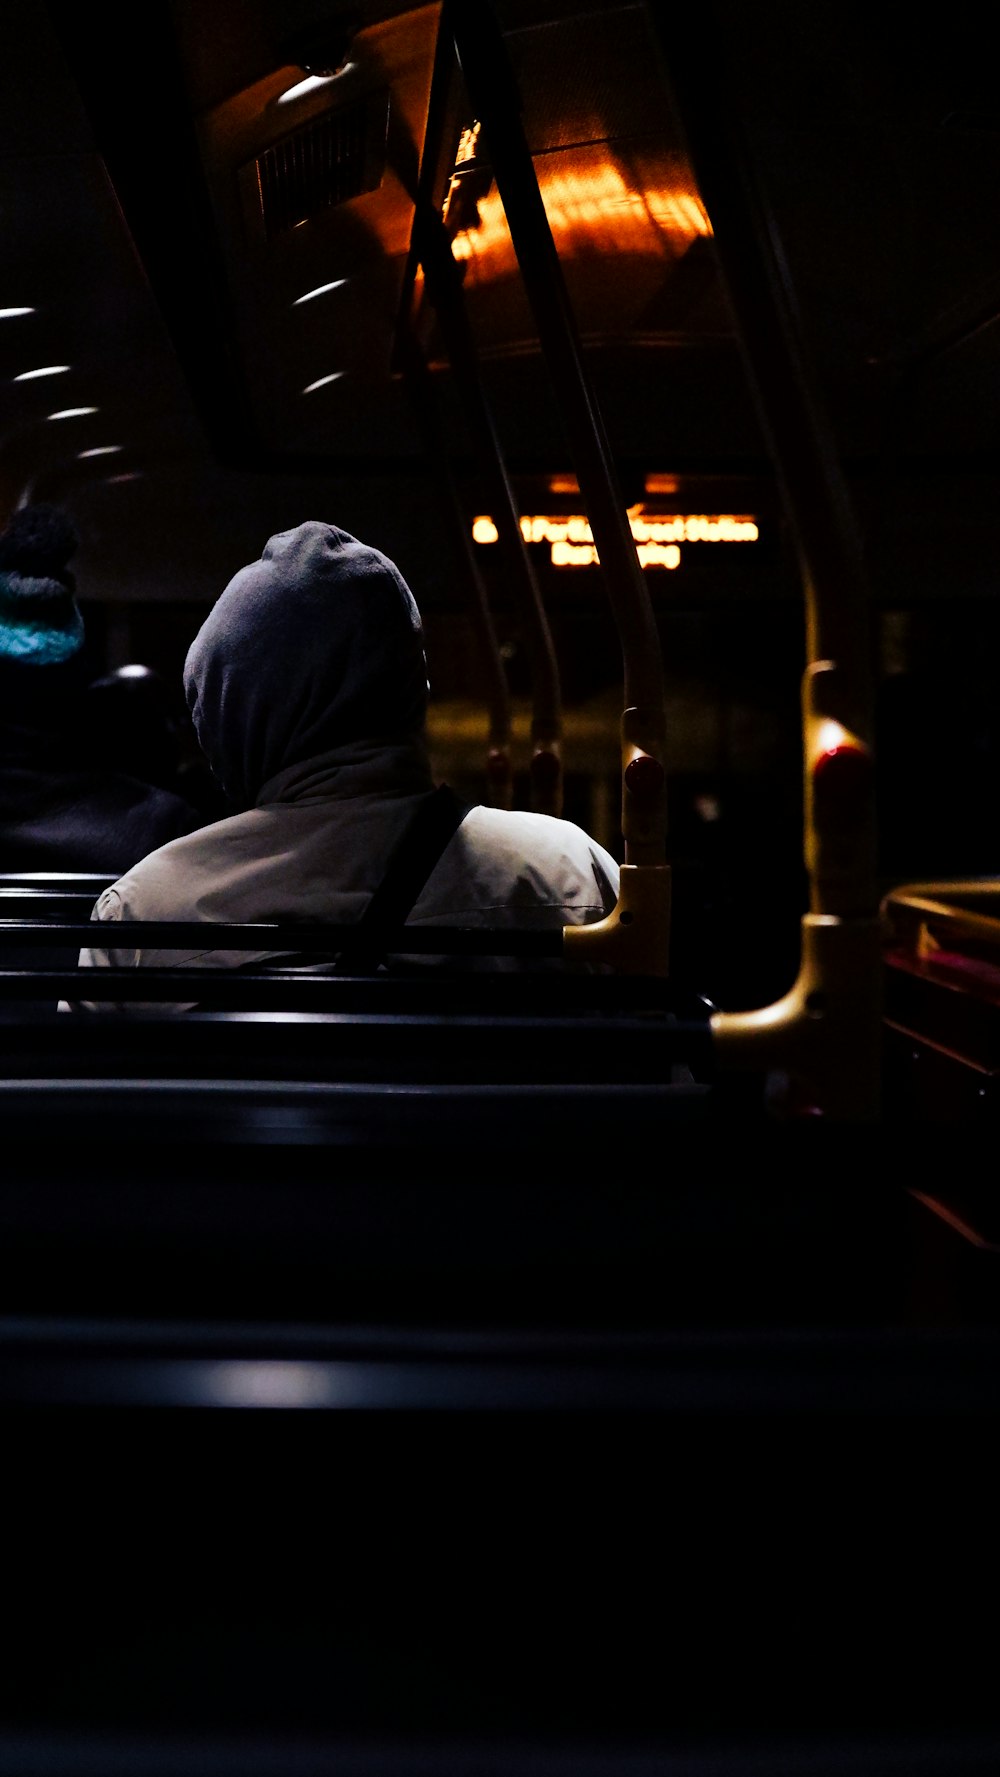 a person sitting on a bus in the dark